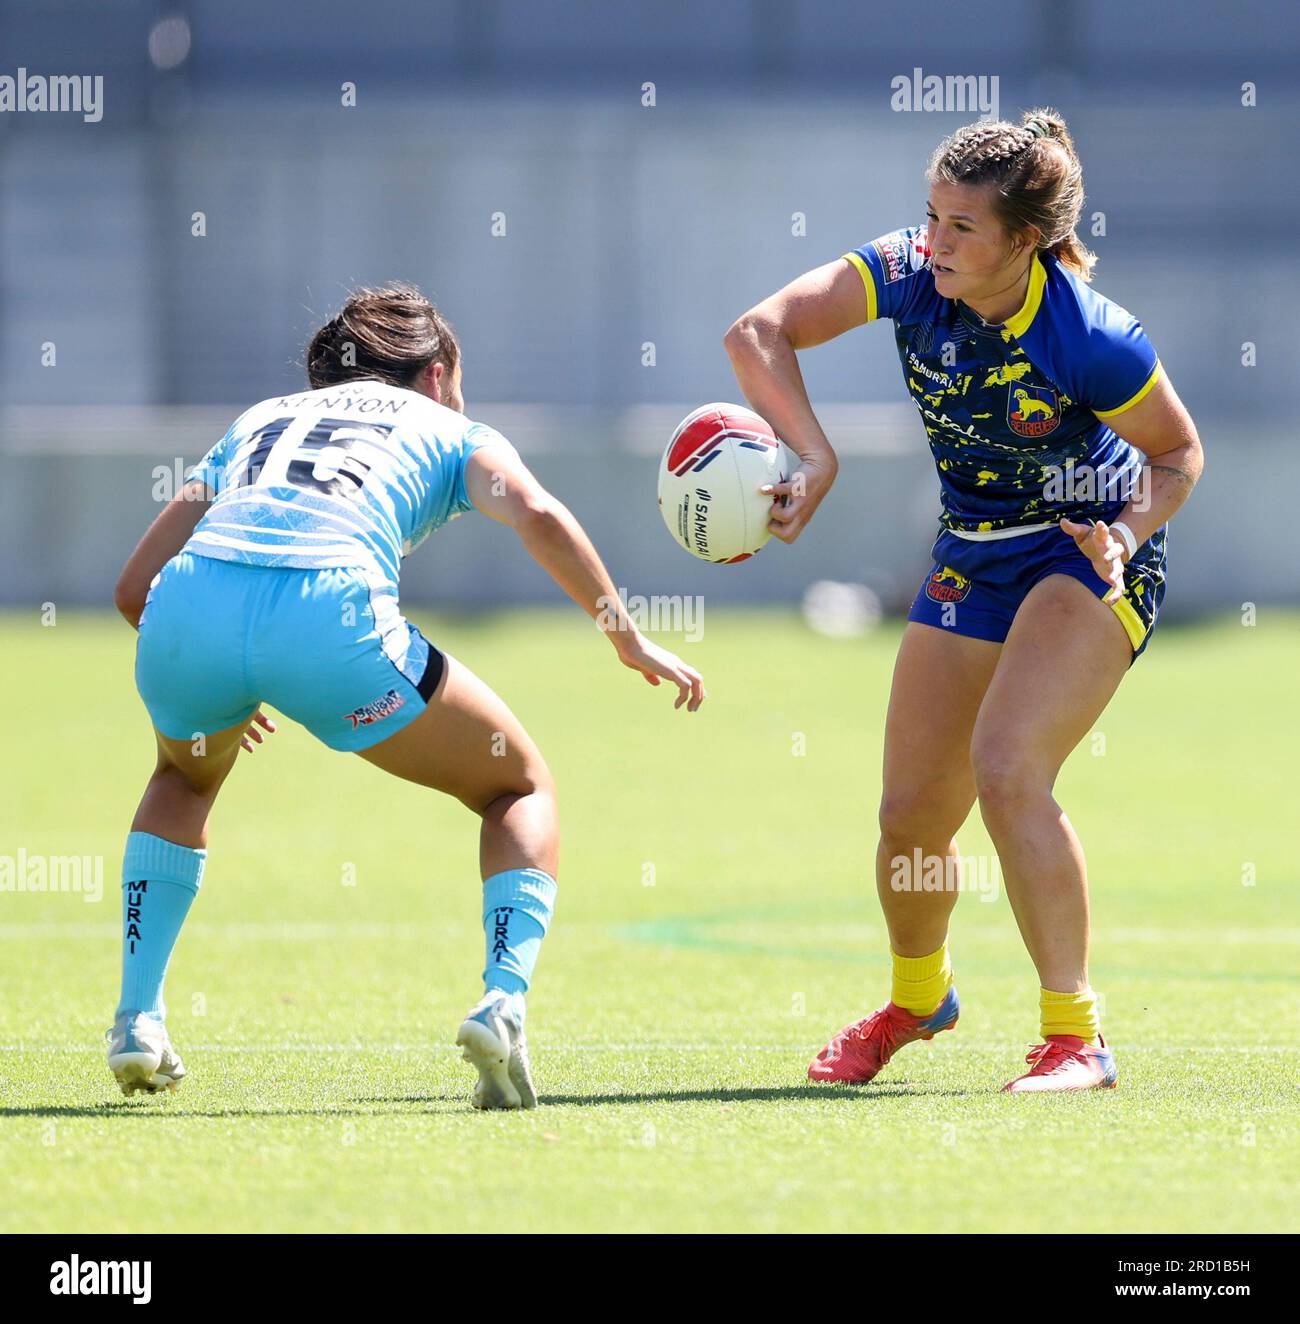 July 15, 2023, San Jose, California, U.S: Golden State Retrievers RAFAELA  ZANELLATO (14) passes the ball under pressure from Rocky Mountain Experts  NIKKI KENYON (15) during the Premier Rugby Sevens Western Conference